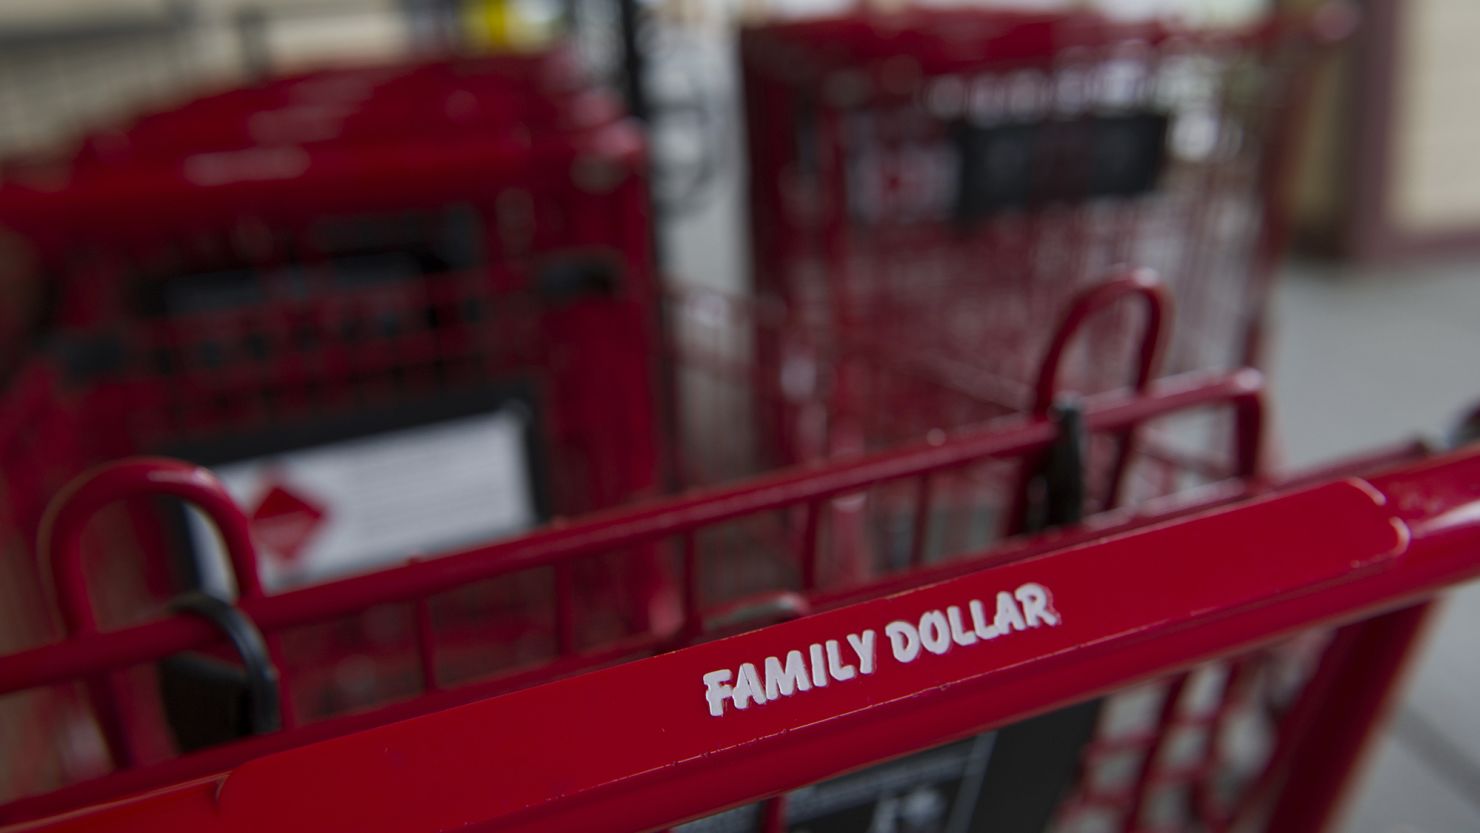 Family Dollar Stores was slapped with a record fine in connection to its rodent-infested warehouse.